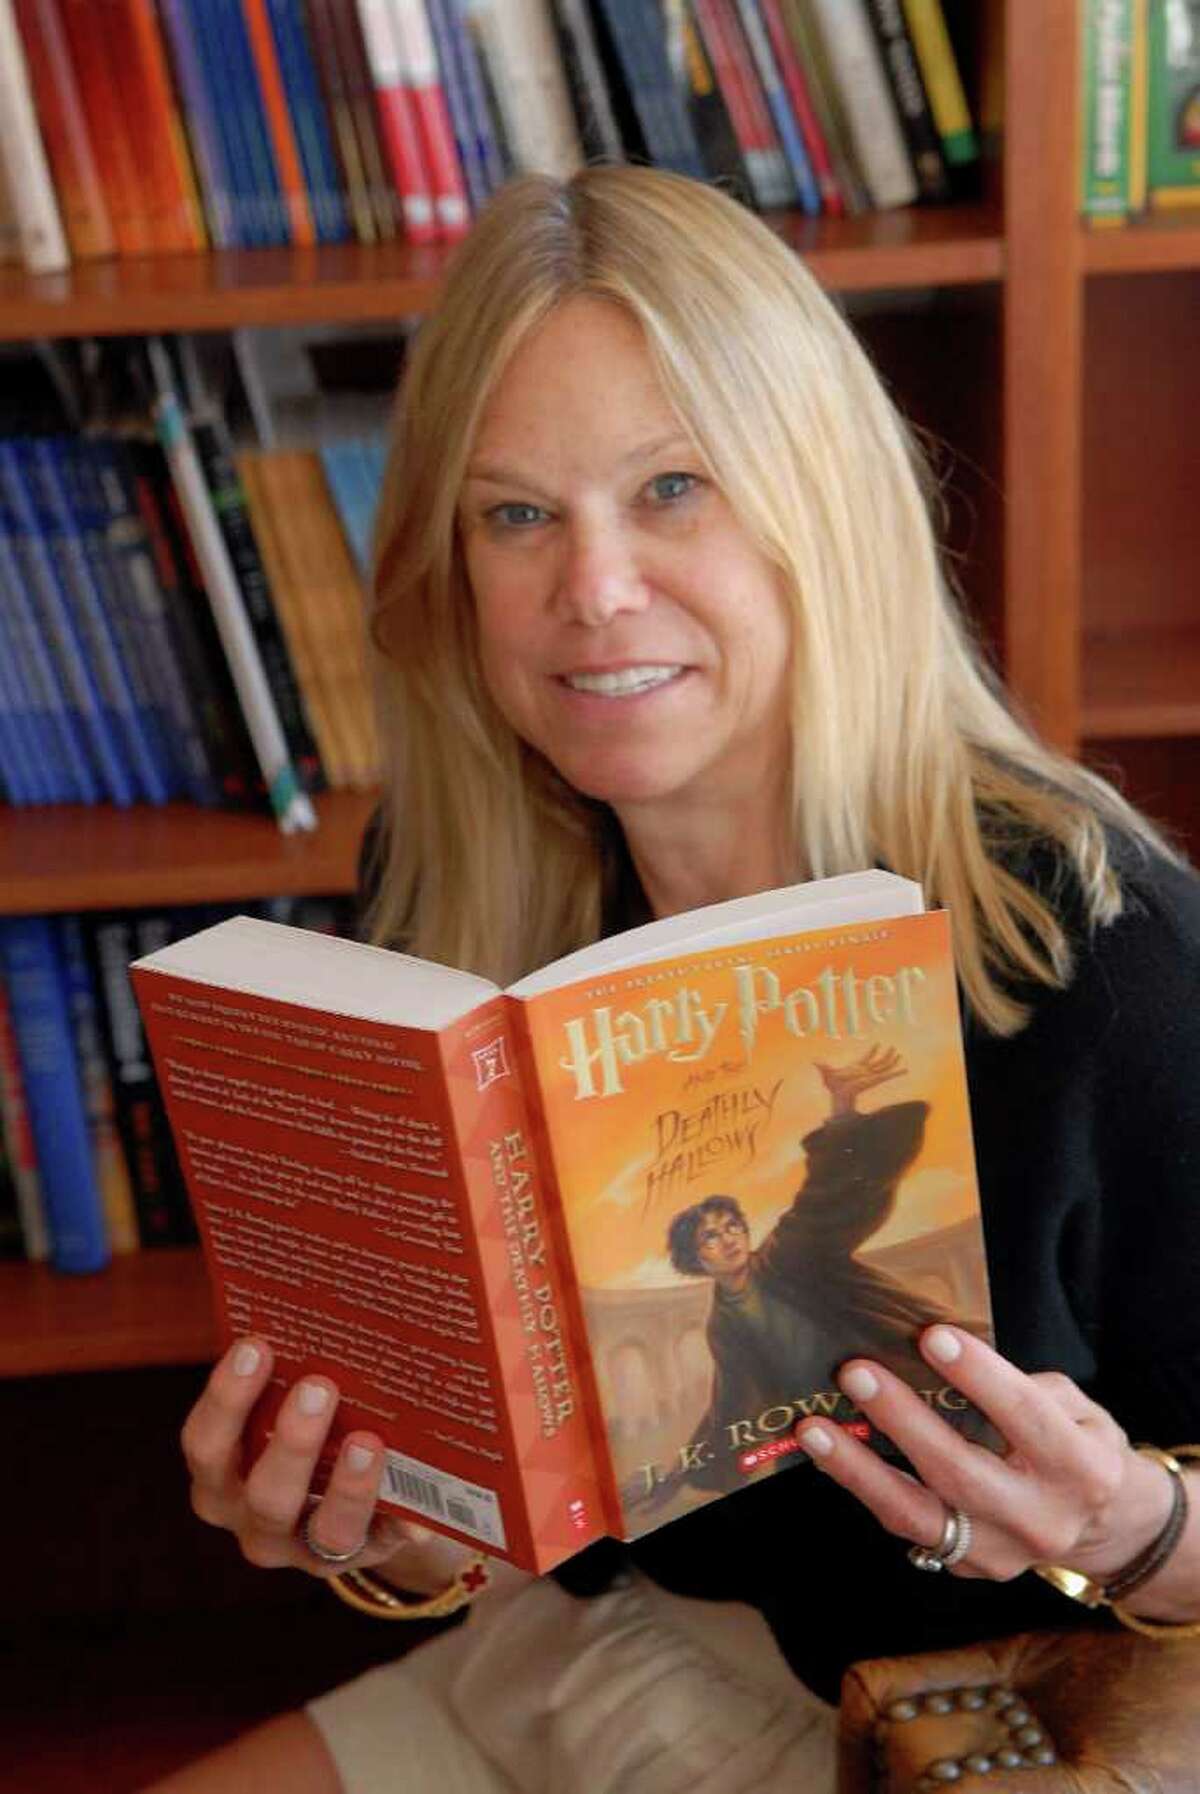 Marion Boucher Holmes of " Just Books" in Old Greenwich, Conn. poses in the store with the last book in the Harry Potter series on July 15, 2011.